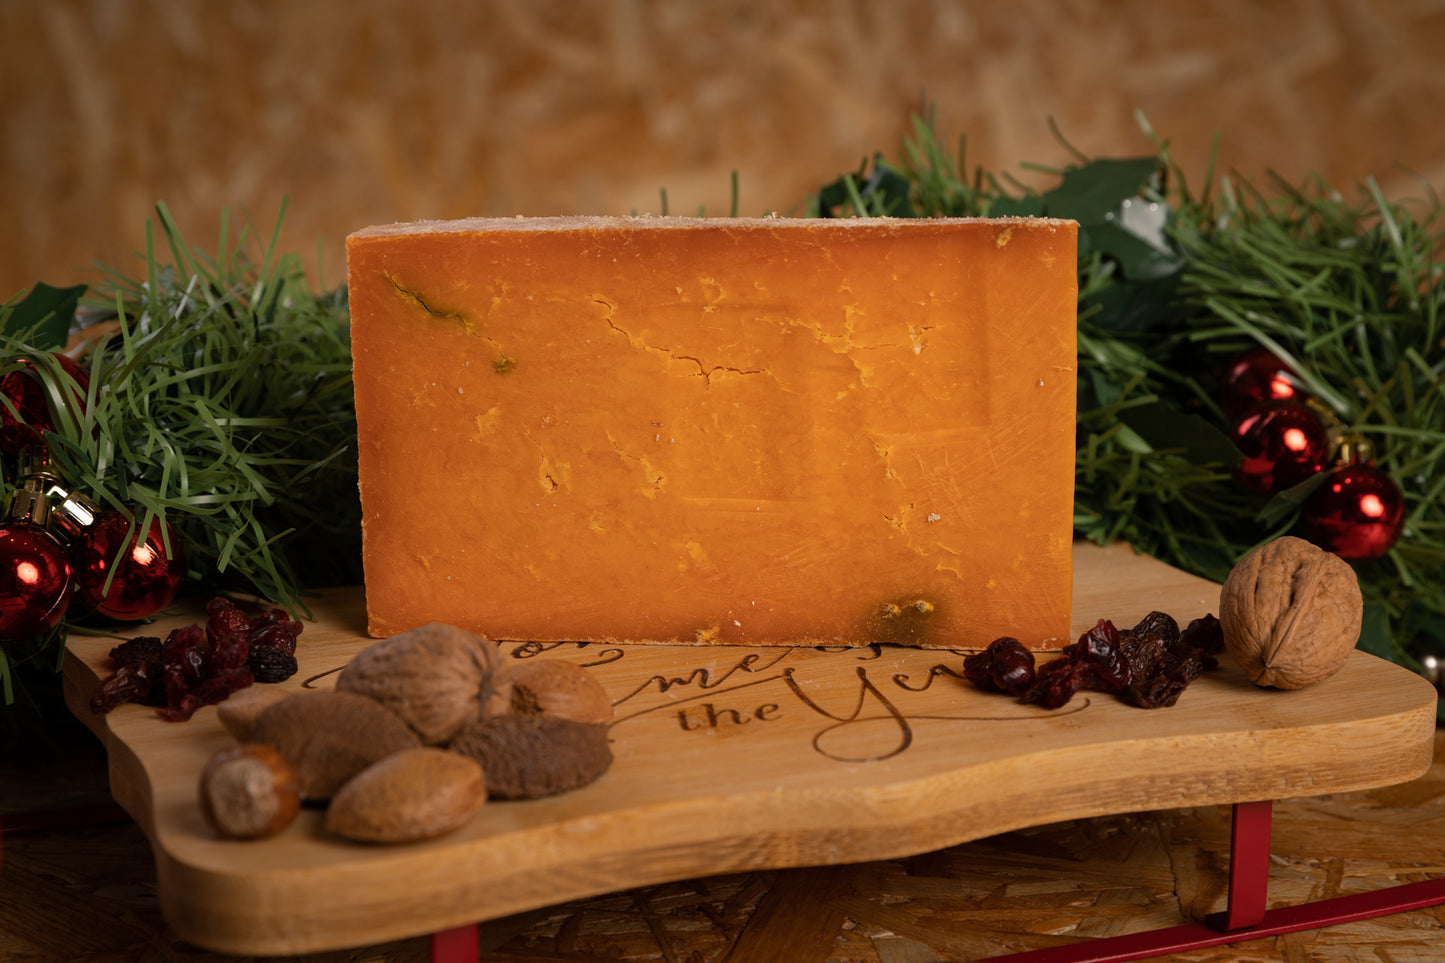 Sparkenhoe Red Leicester (Leicestershire, cow, unpasteurised)